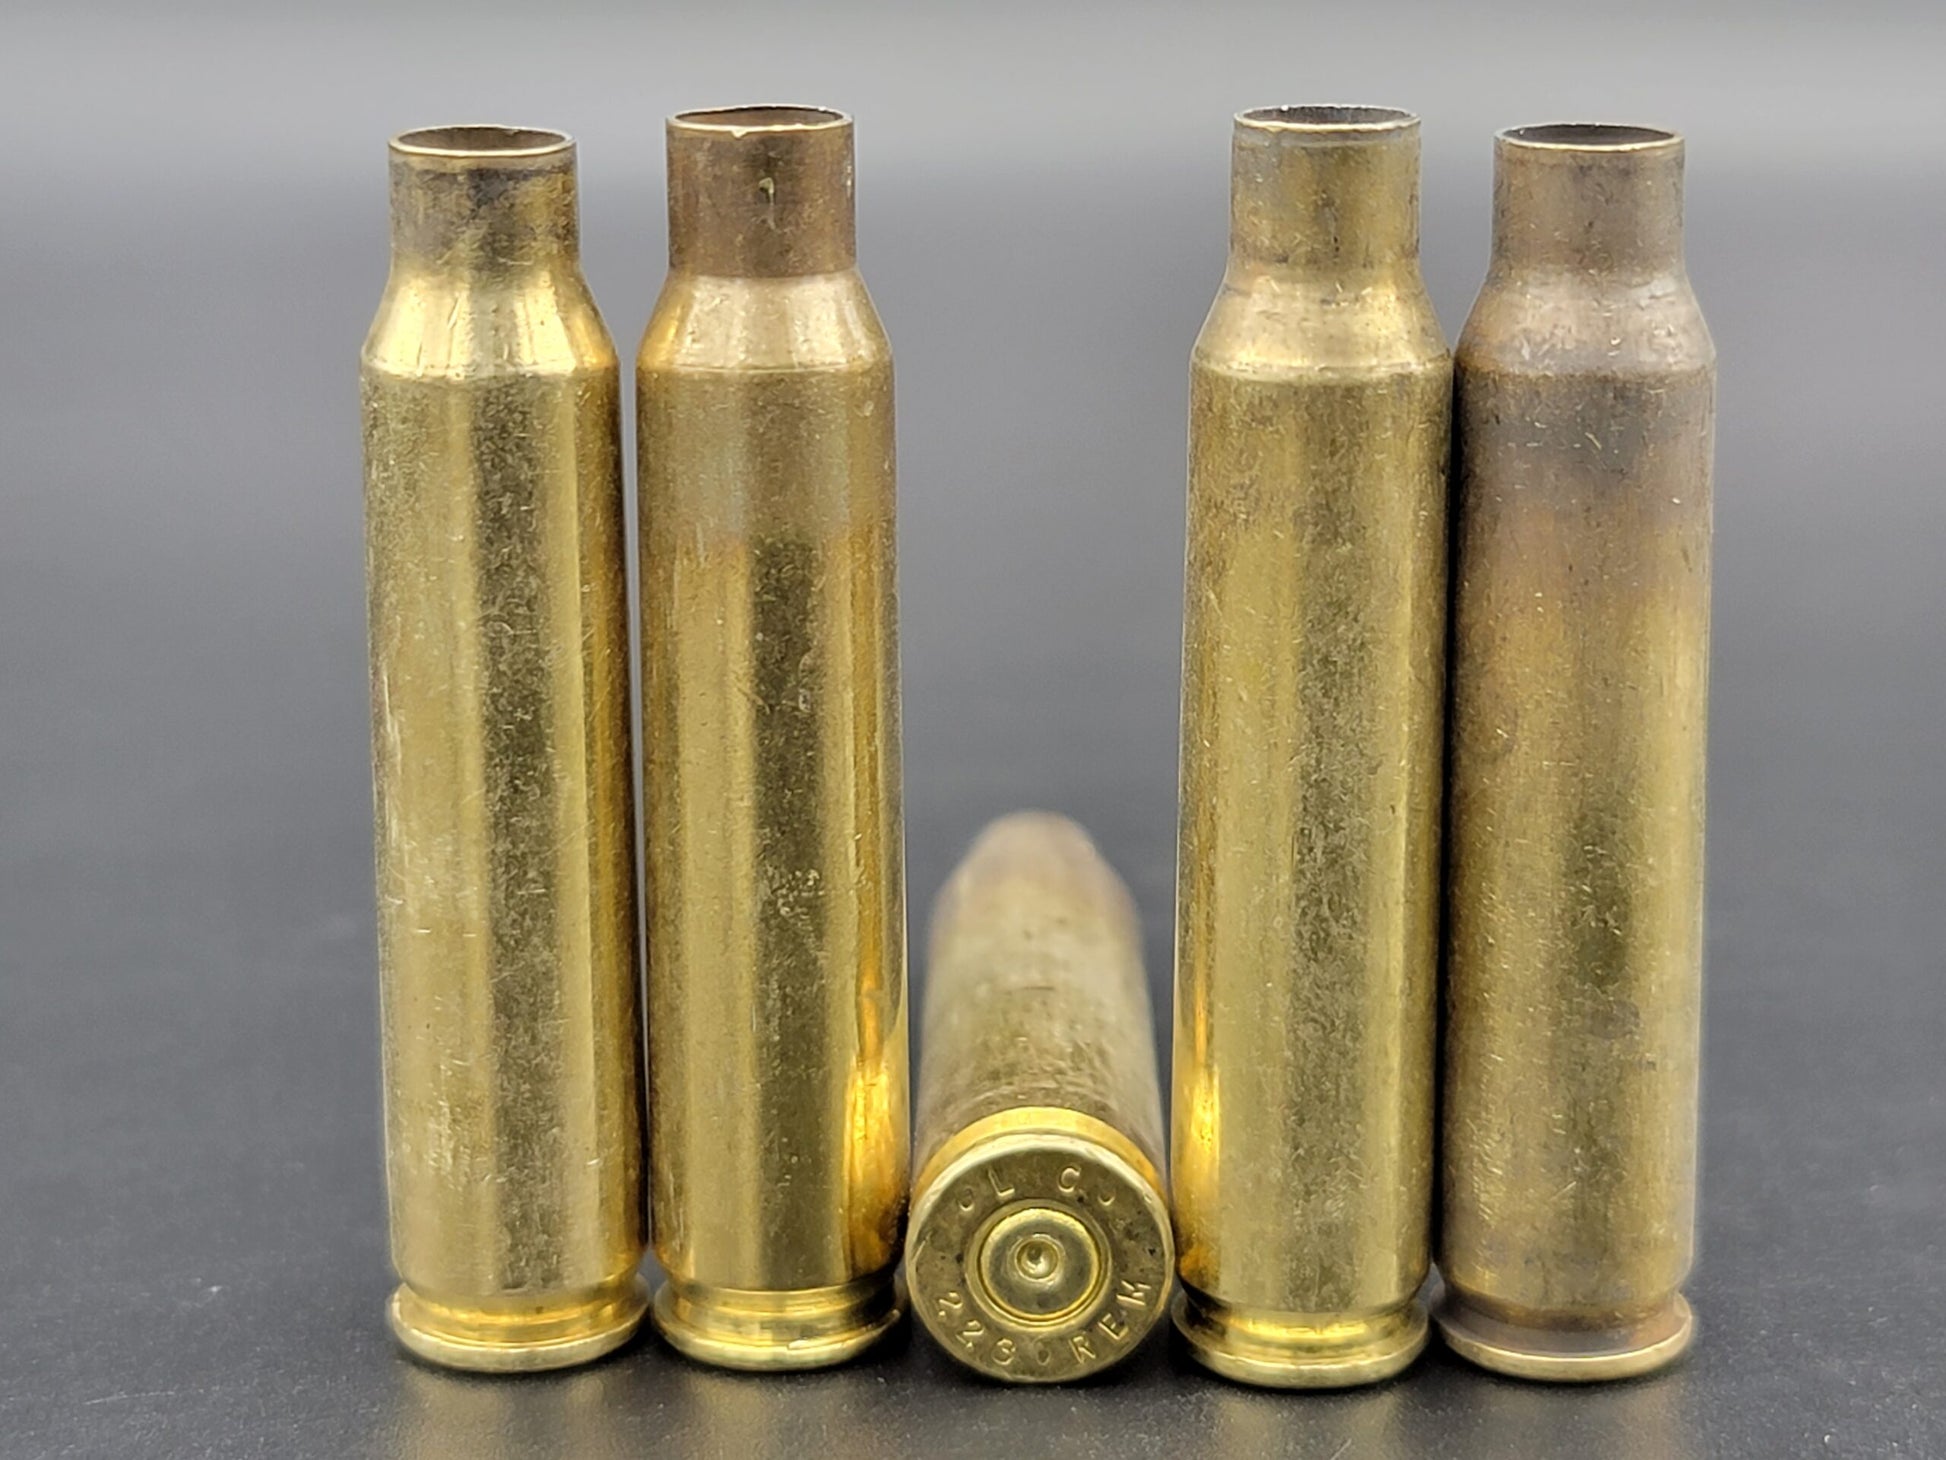 223/5.56 once fired rifle brass. Hand sorted from reputable indoor/military ranges for reloading. Reliable spent casings for precision shooting.